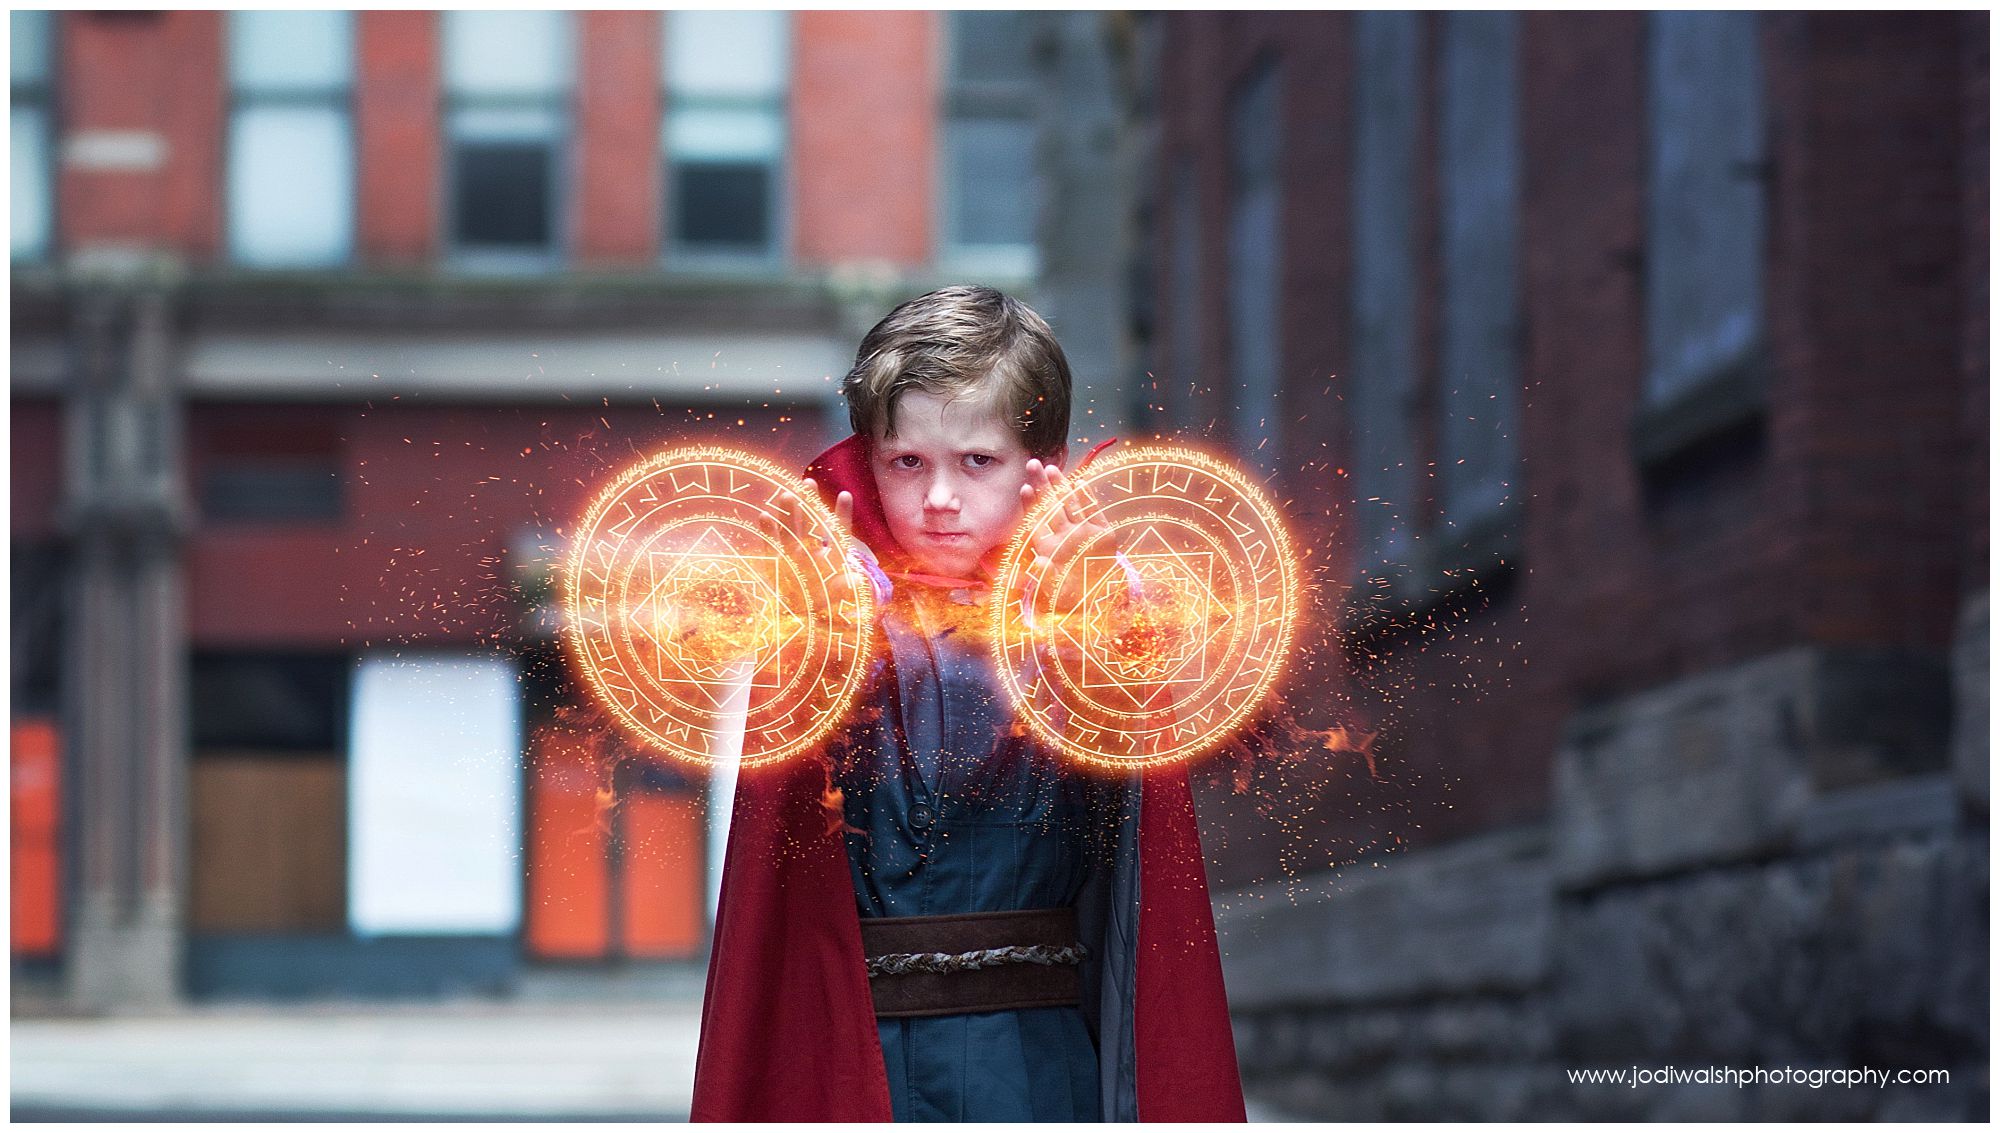 little boy in Dr. Strange inspired cosplay in Pittsburgh alley